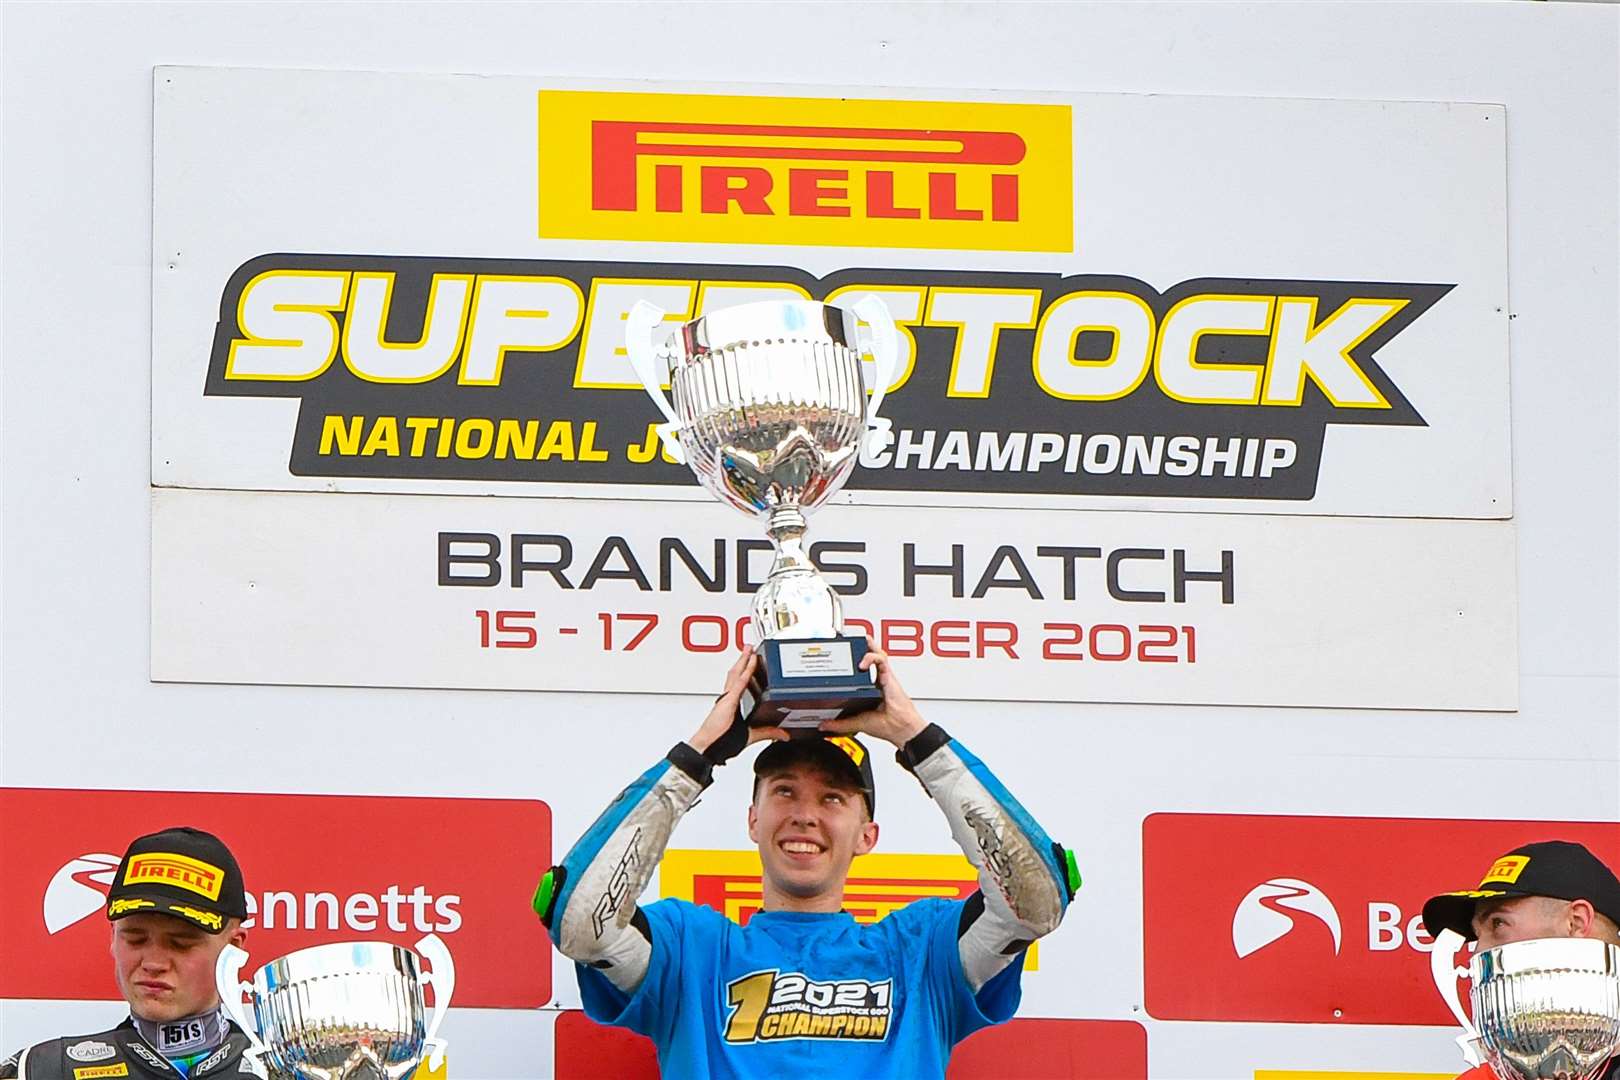 Folkestone's Jack Nixon celebrates his title win at Brands Hatch. Picture: Camipix Photography